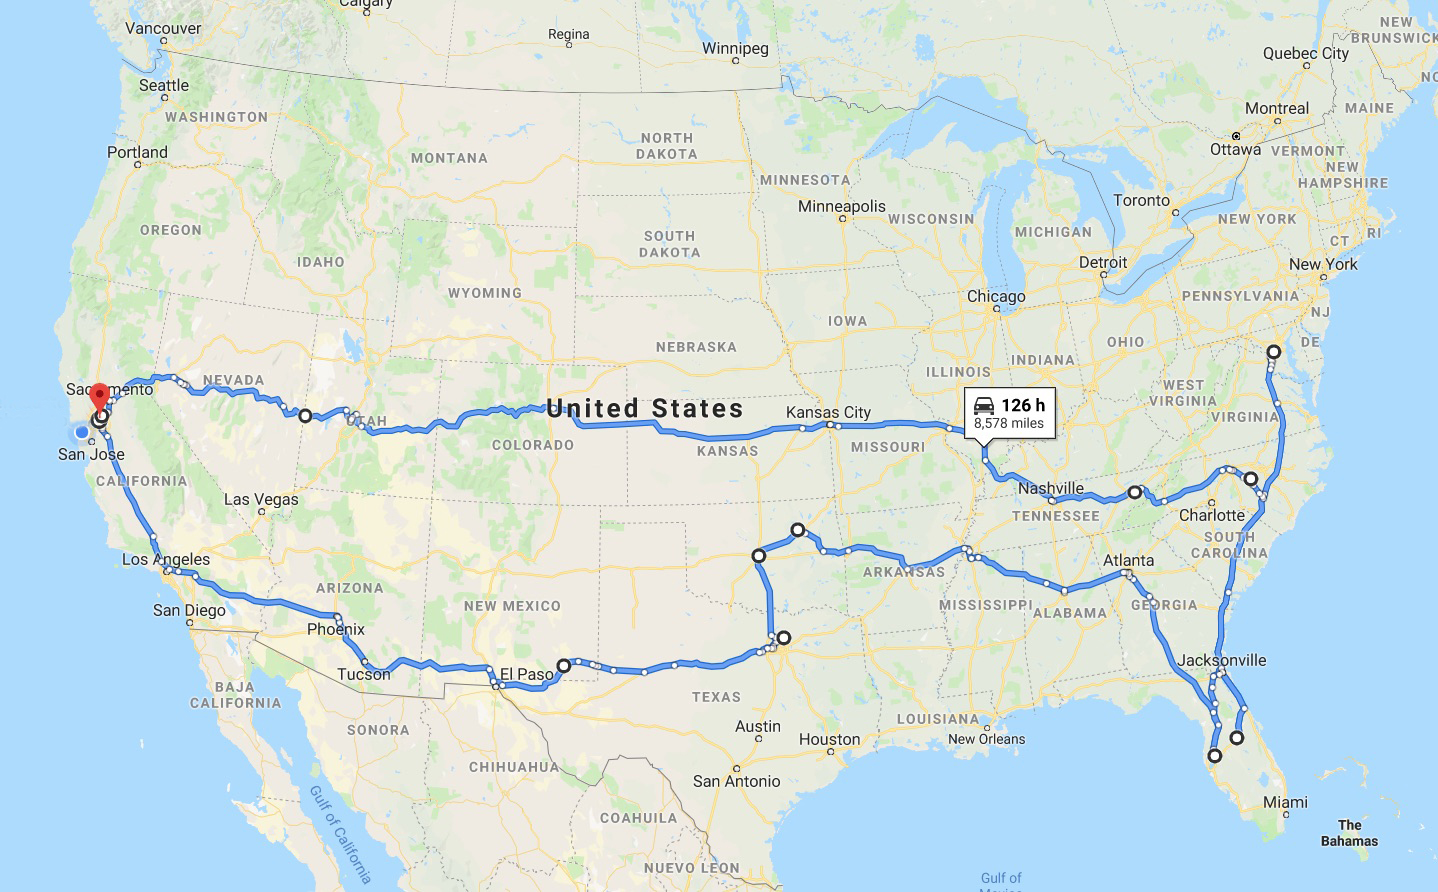 Elliott, Robin, and Stitch's travels mapped across the US